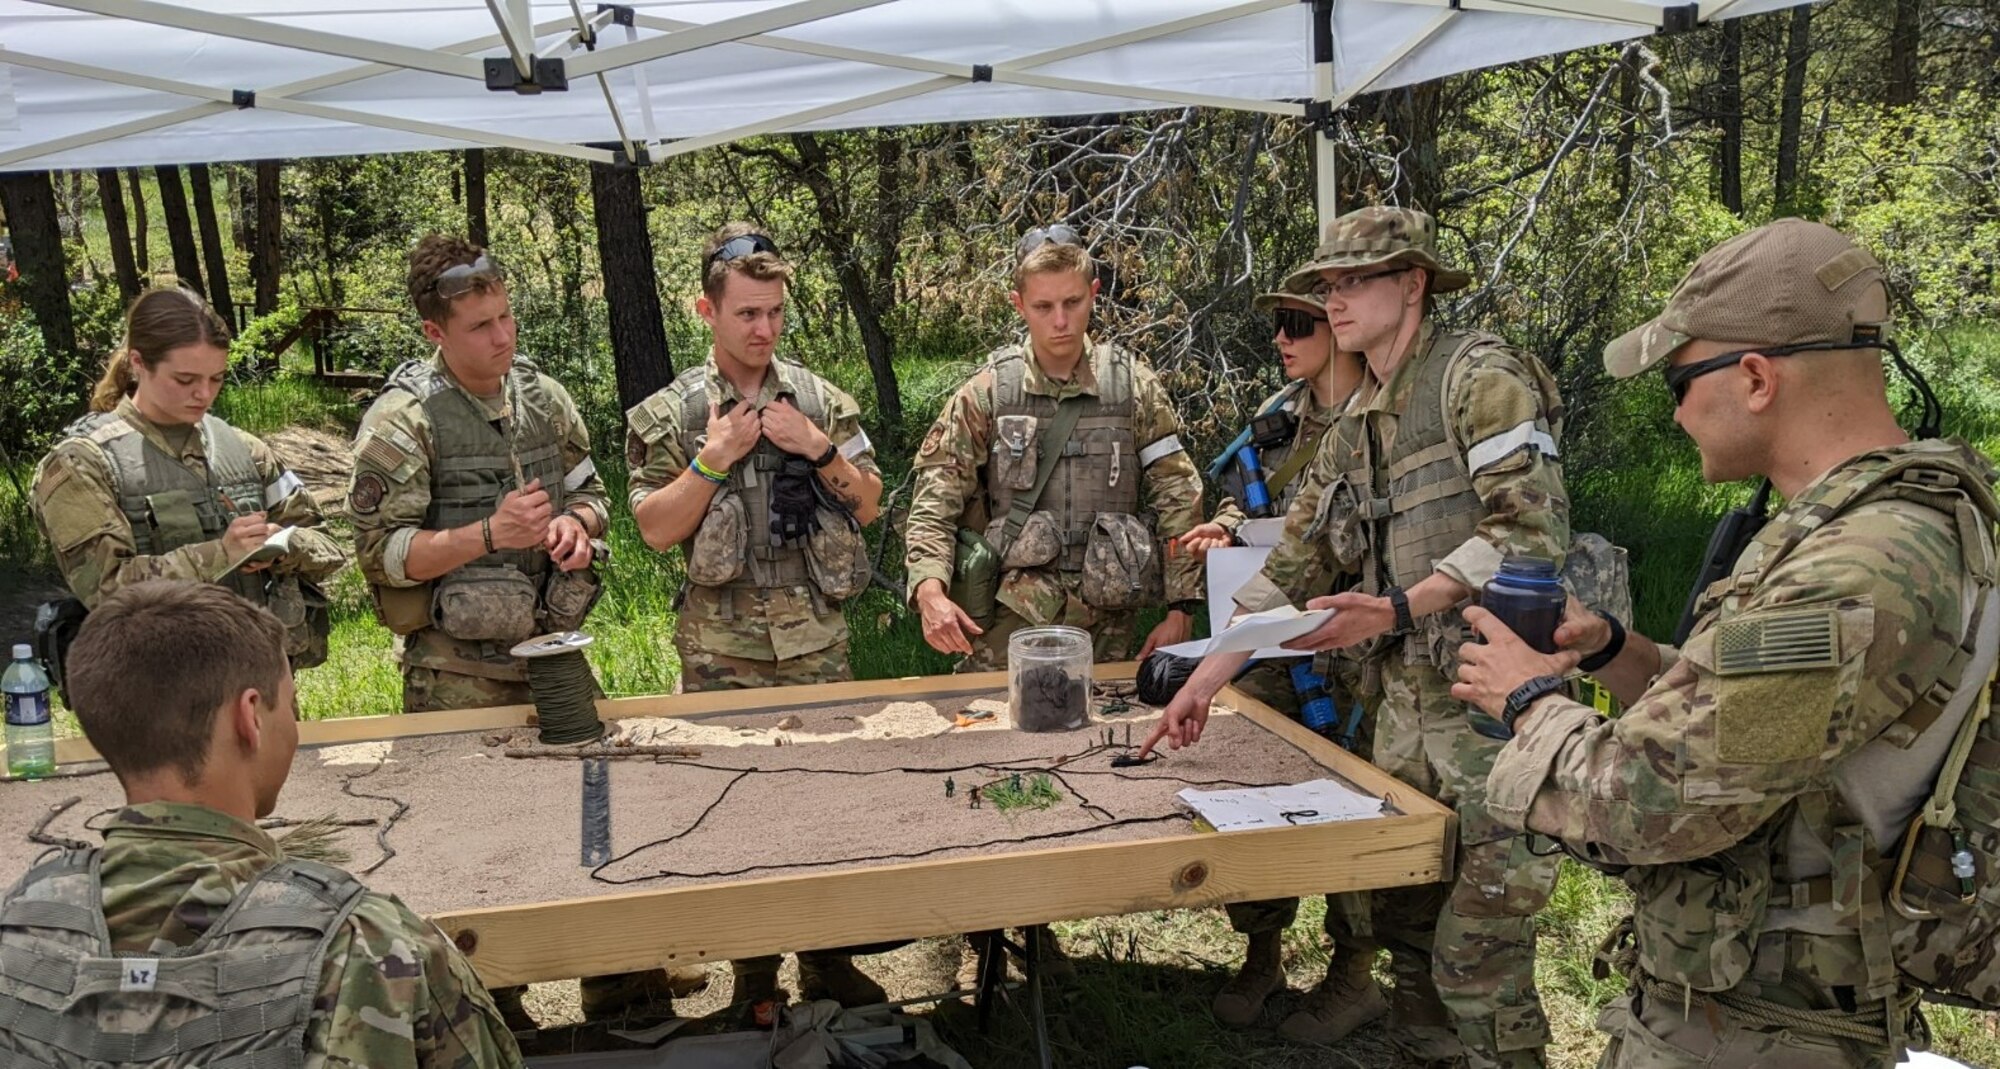 Cadets collectively strategize mission plans as a culmination of the skills learned during the Special Warfare Orientation Course at the U.S. Air Force Academy, Colo., June 13, 2022. Teams of 10 received orders to execute various parts of simulated missions.  Each team planned their actions using troop leading procedures and a sand table then executed the mission. (U.S. Air Force Academy courtesy photo)